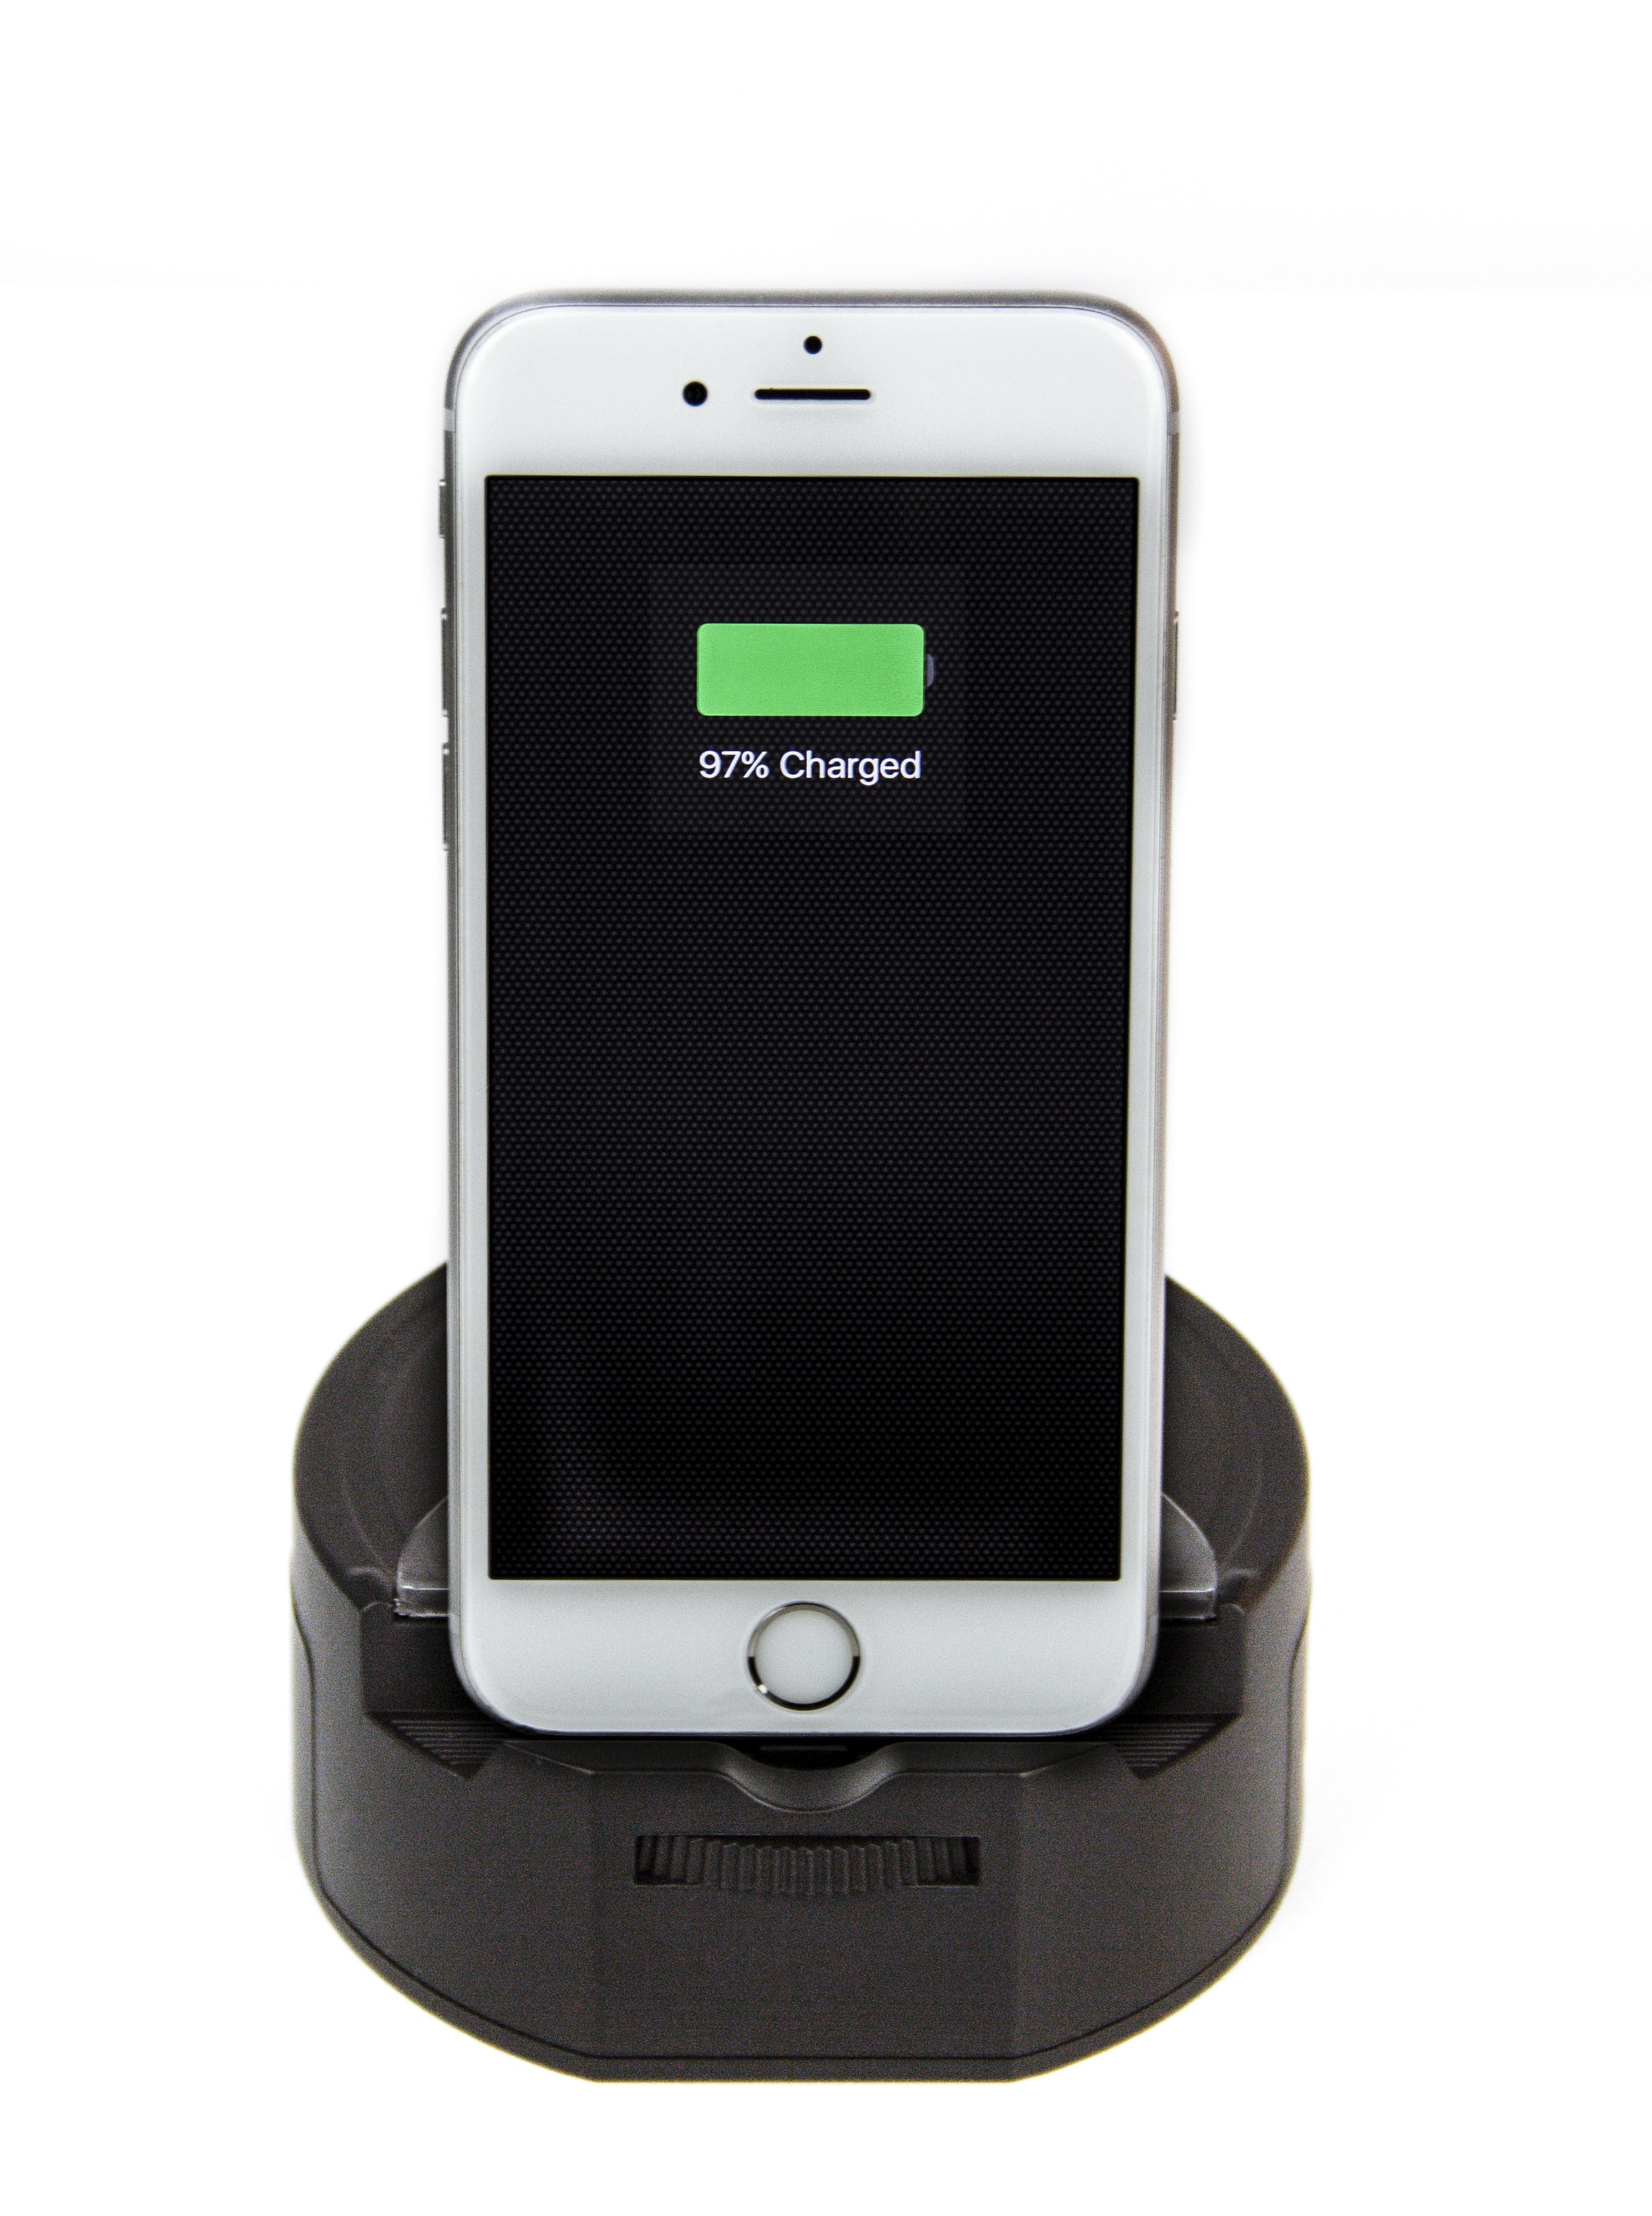 LumiCharge 3-in-1 Phone Charger Dock - iPhone, Airpod, Samsung, Android-Wireless Charger